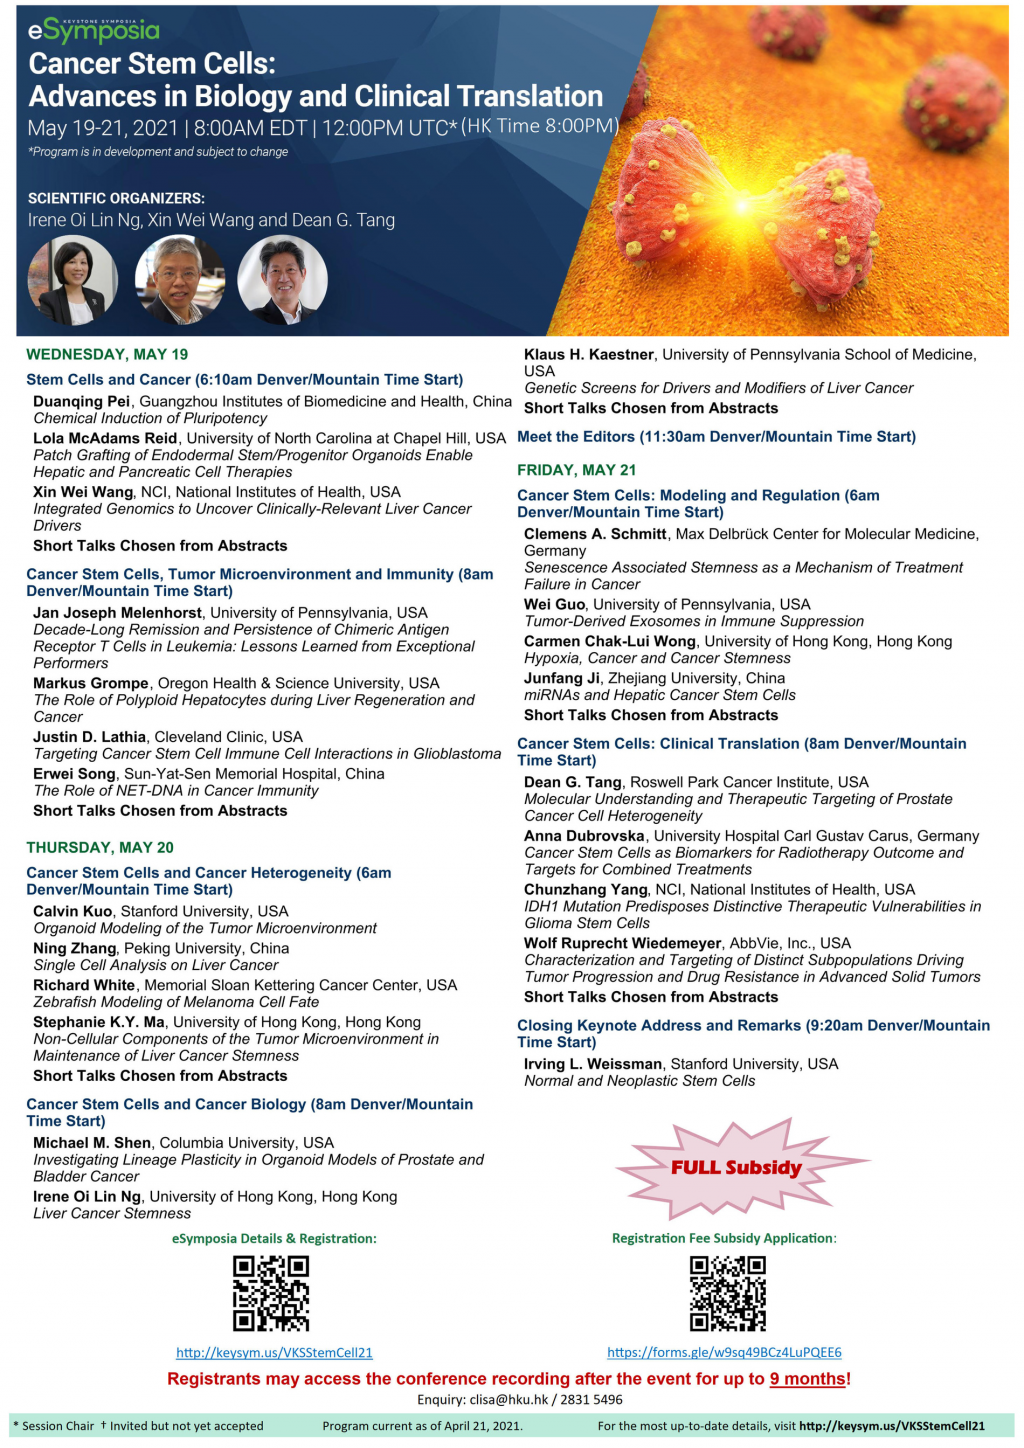 KEYSTONE SYMPOSIA Cancer Stem Cells: Advances in Biology and Clinical Translation